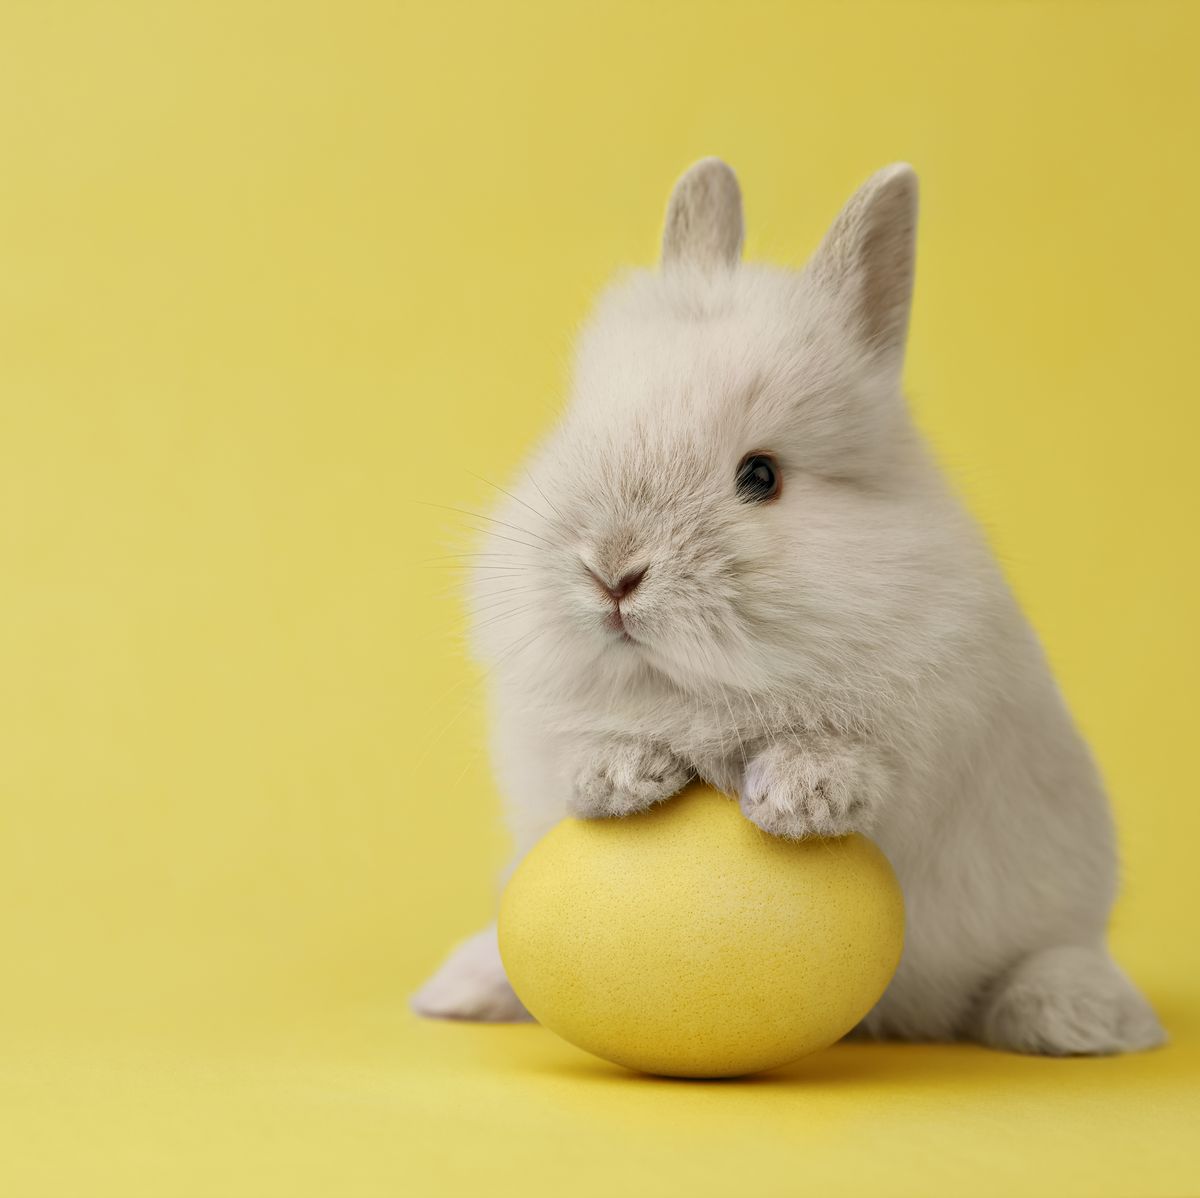 https://hips.hearstapps.com/hmg-prod/images/easter-bunny-with-egg-on-yellow-background-royalty-free-image-1614715381.?crop=0.668xw:1.00xh;0.244xw,0&resize=1200:*